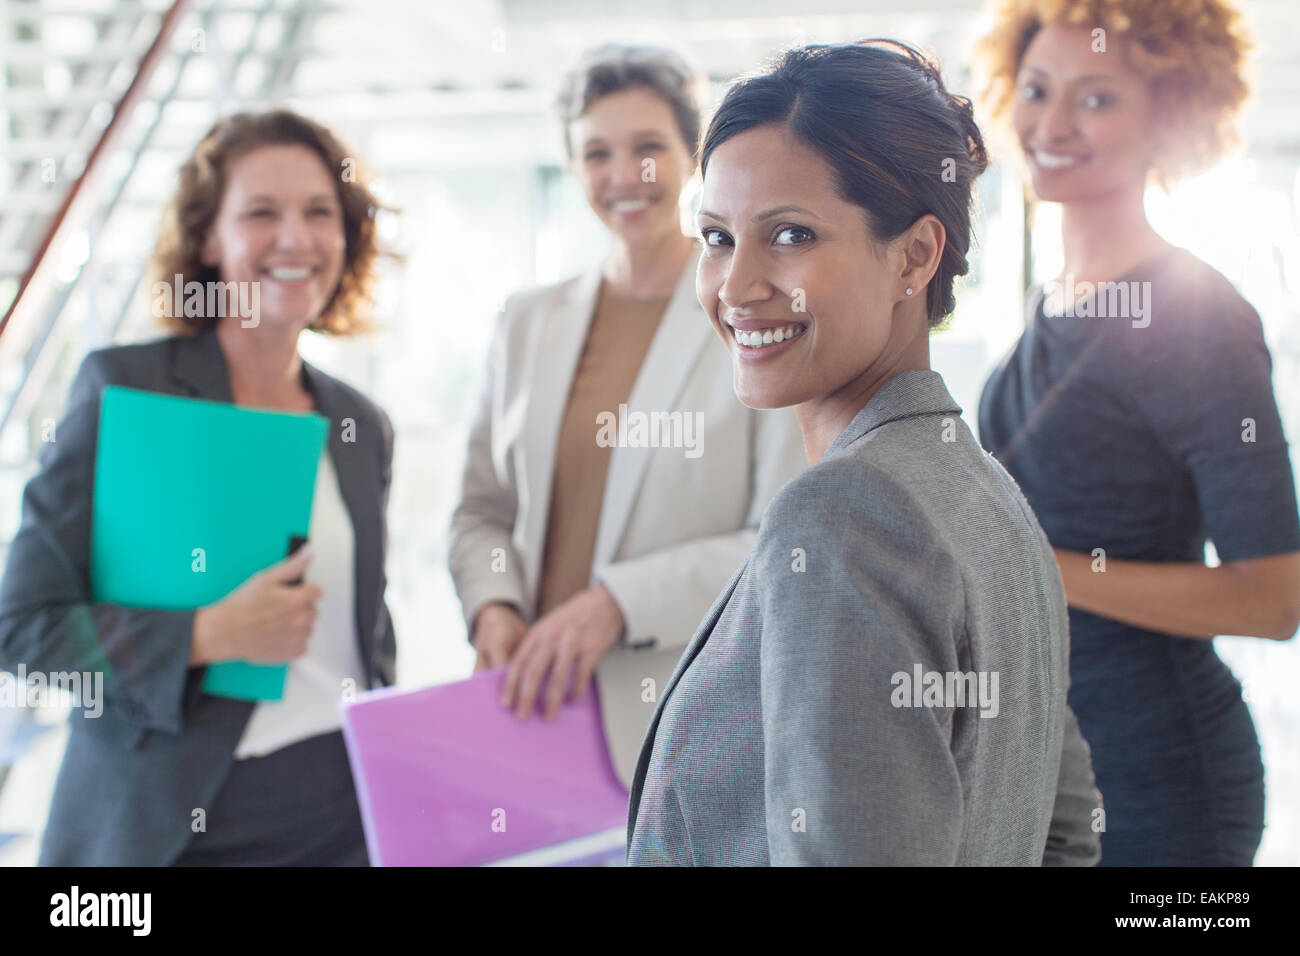 Portrait of four smiling businesswomen in office Stock Photo